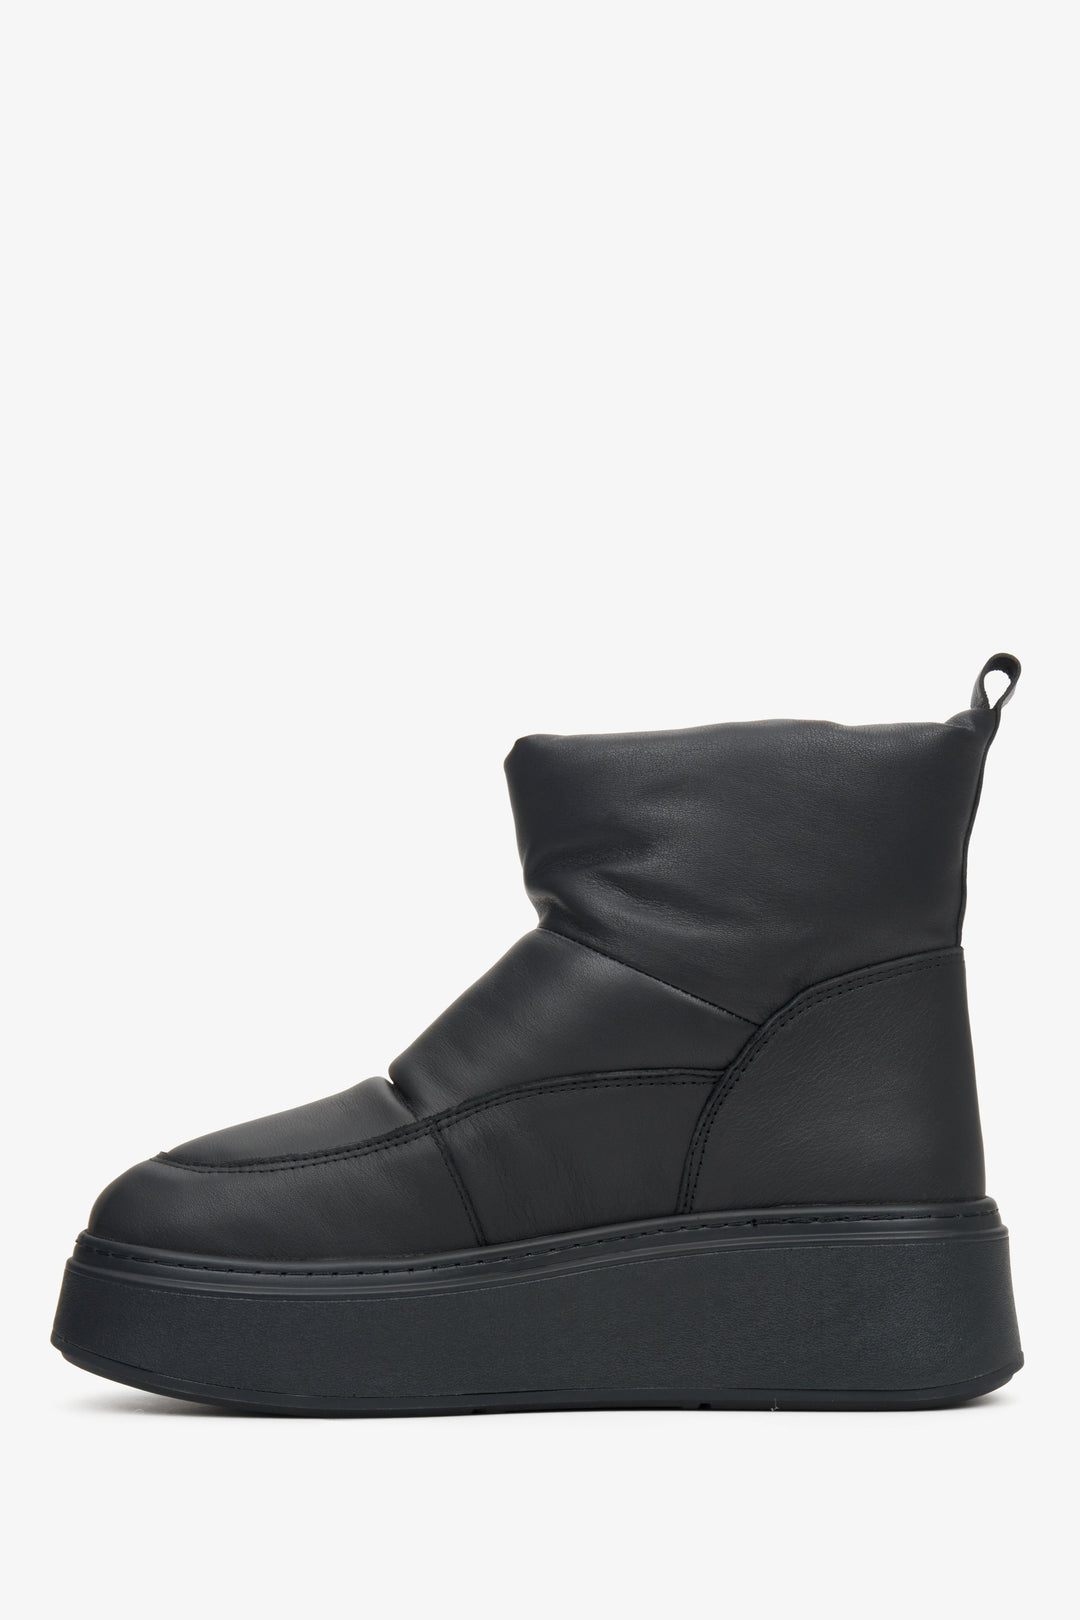 Estro women's black snow boots made of genuine leather with fur lining - shoe profile.